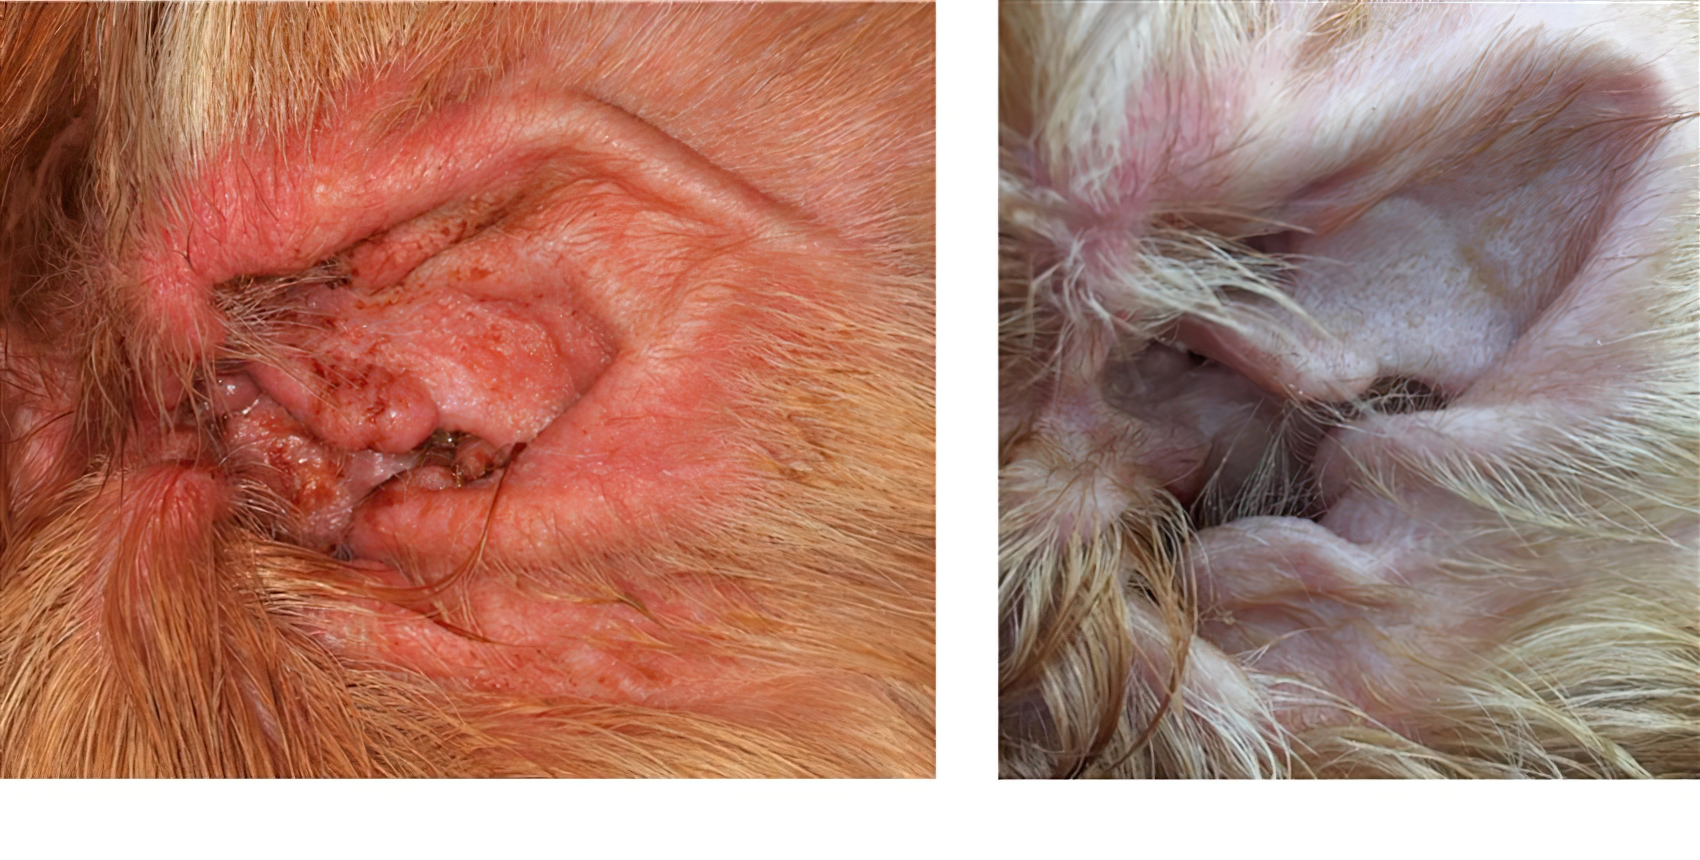 Secondary Pseudomonas Otitis Externa: before & after 5 weeks of Multimodal Treatment, with No Oral nor Aural Antibacterial, Welsh Springer Spaniel